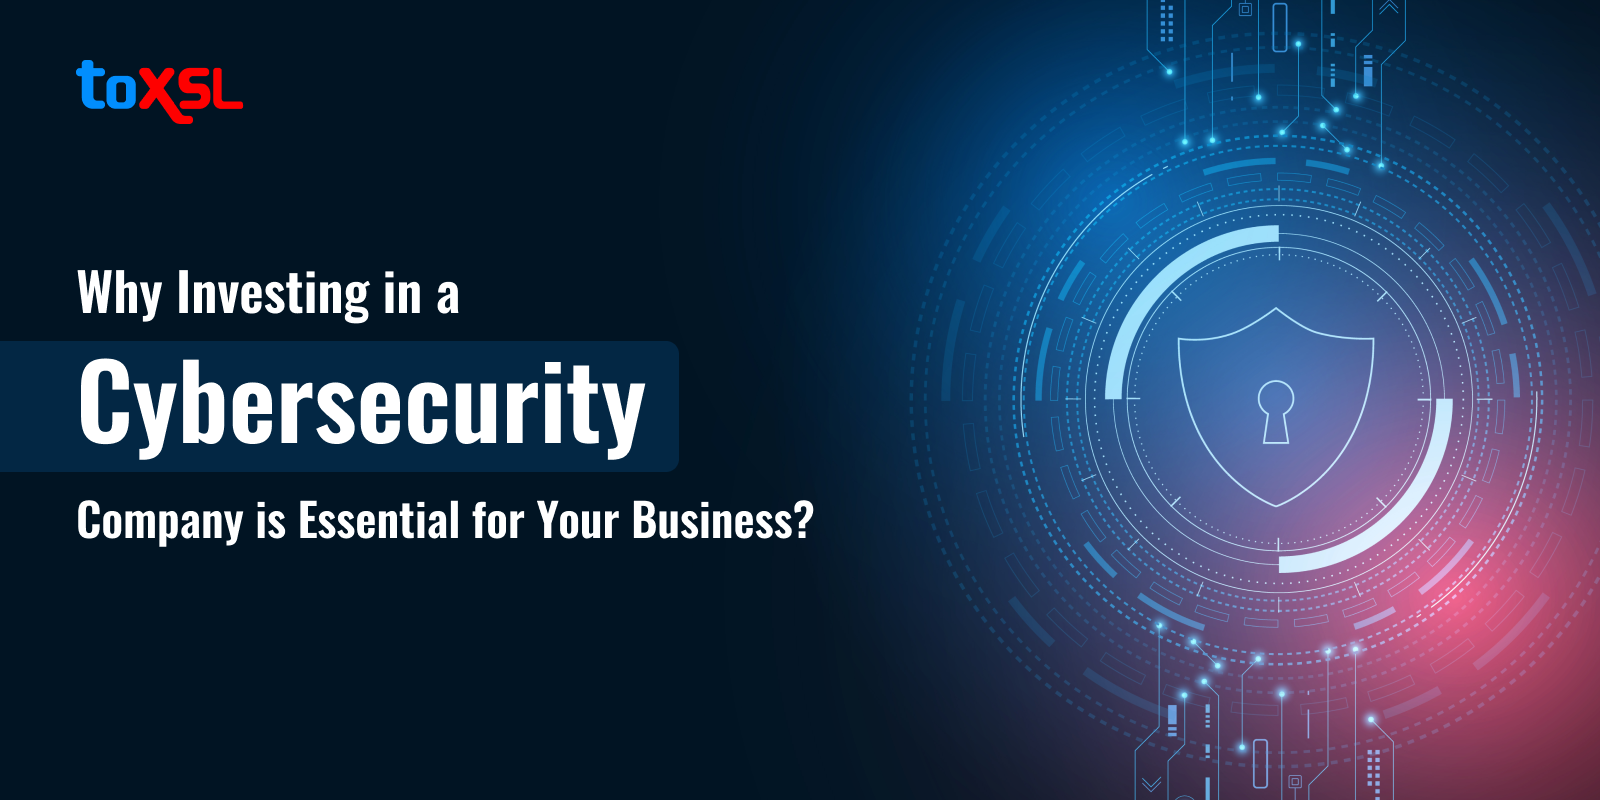 Why Investing in a Cybersecurity Company is Essential for Your Business?